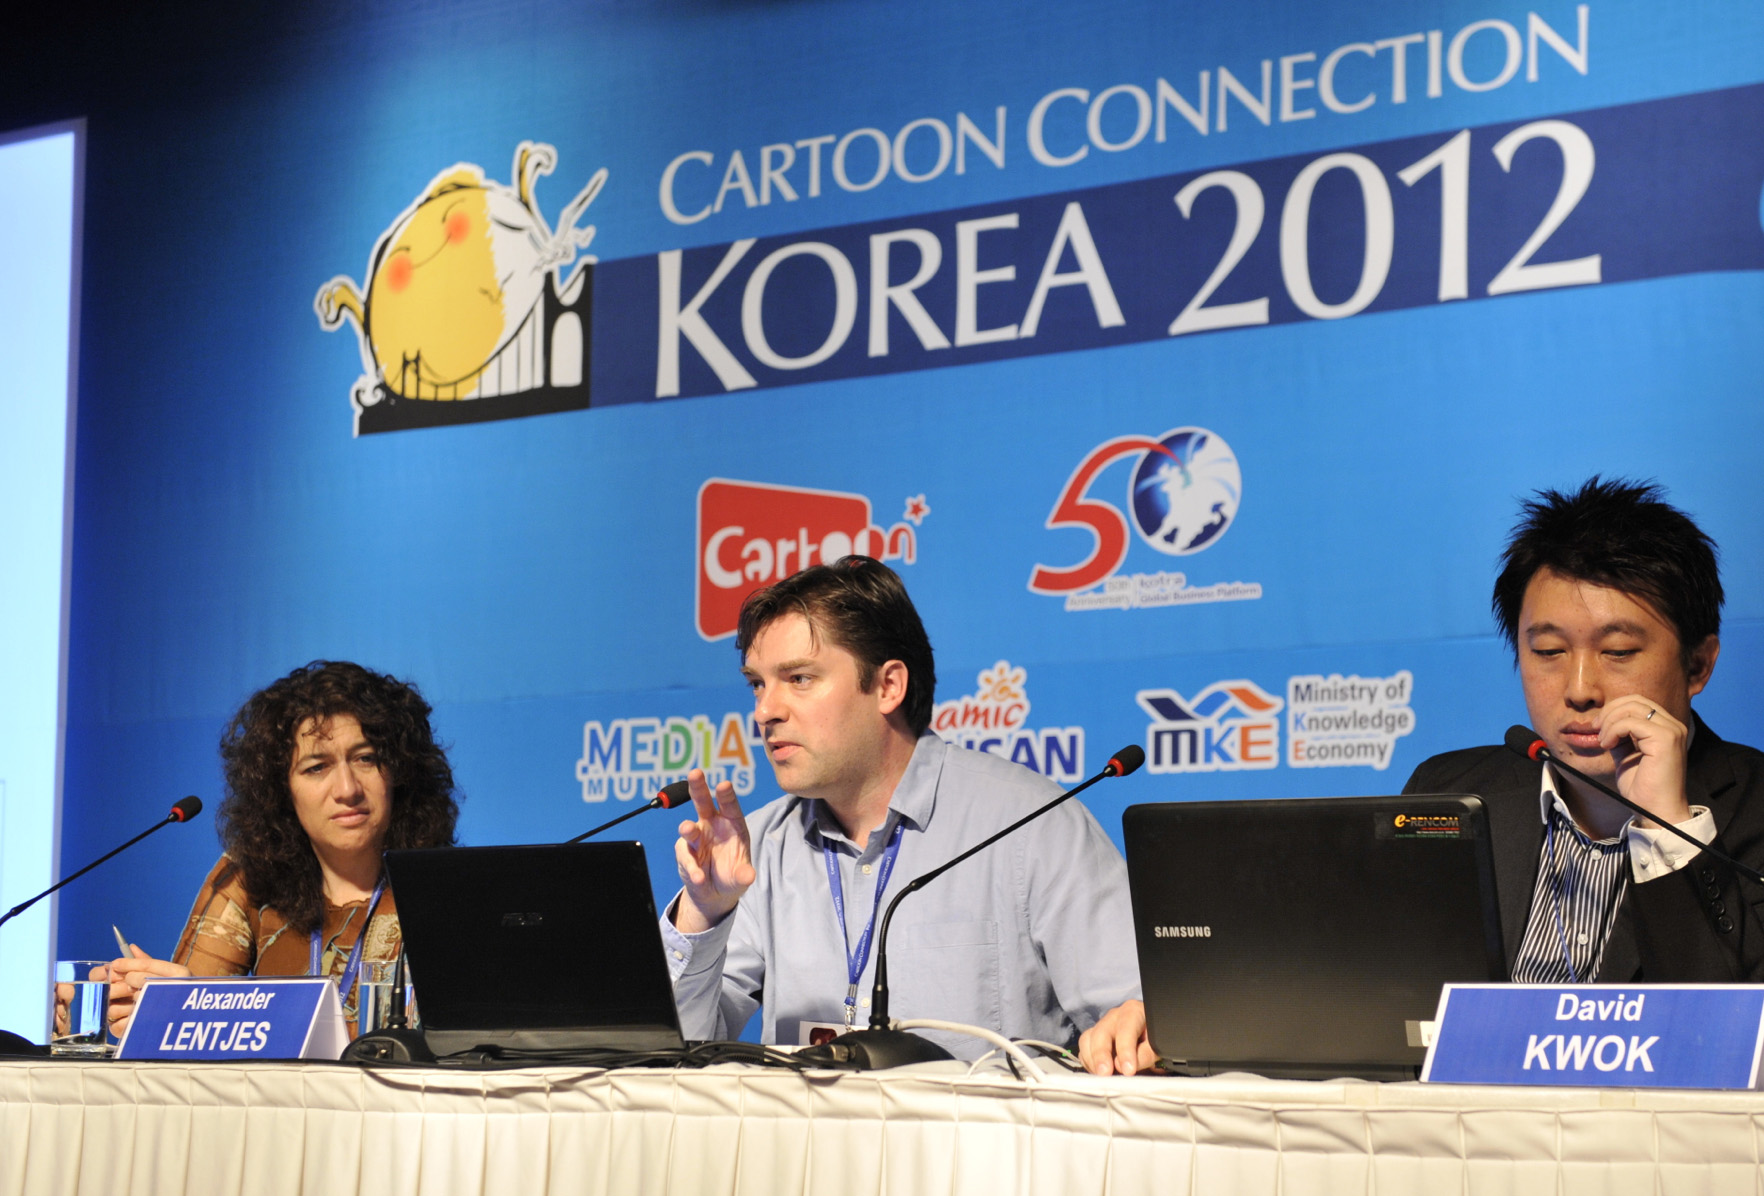 Alexander Lentjes speaking on 3D animation production techniques and beyond at Cartoon Connection Korea 2012